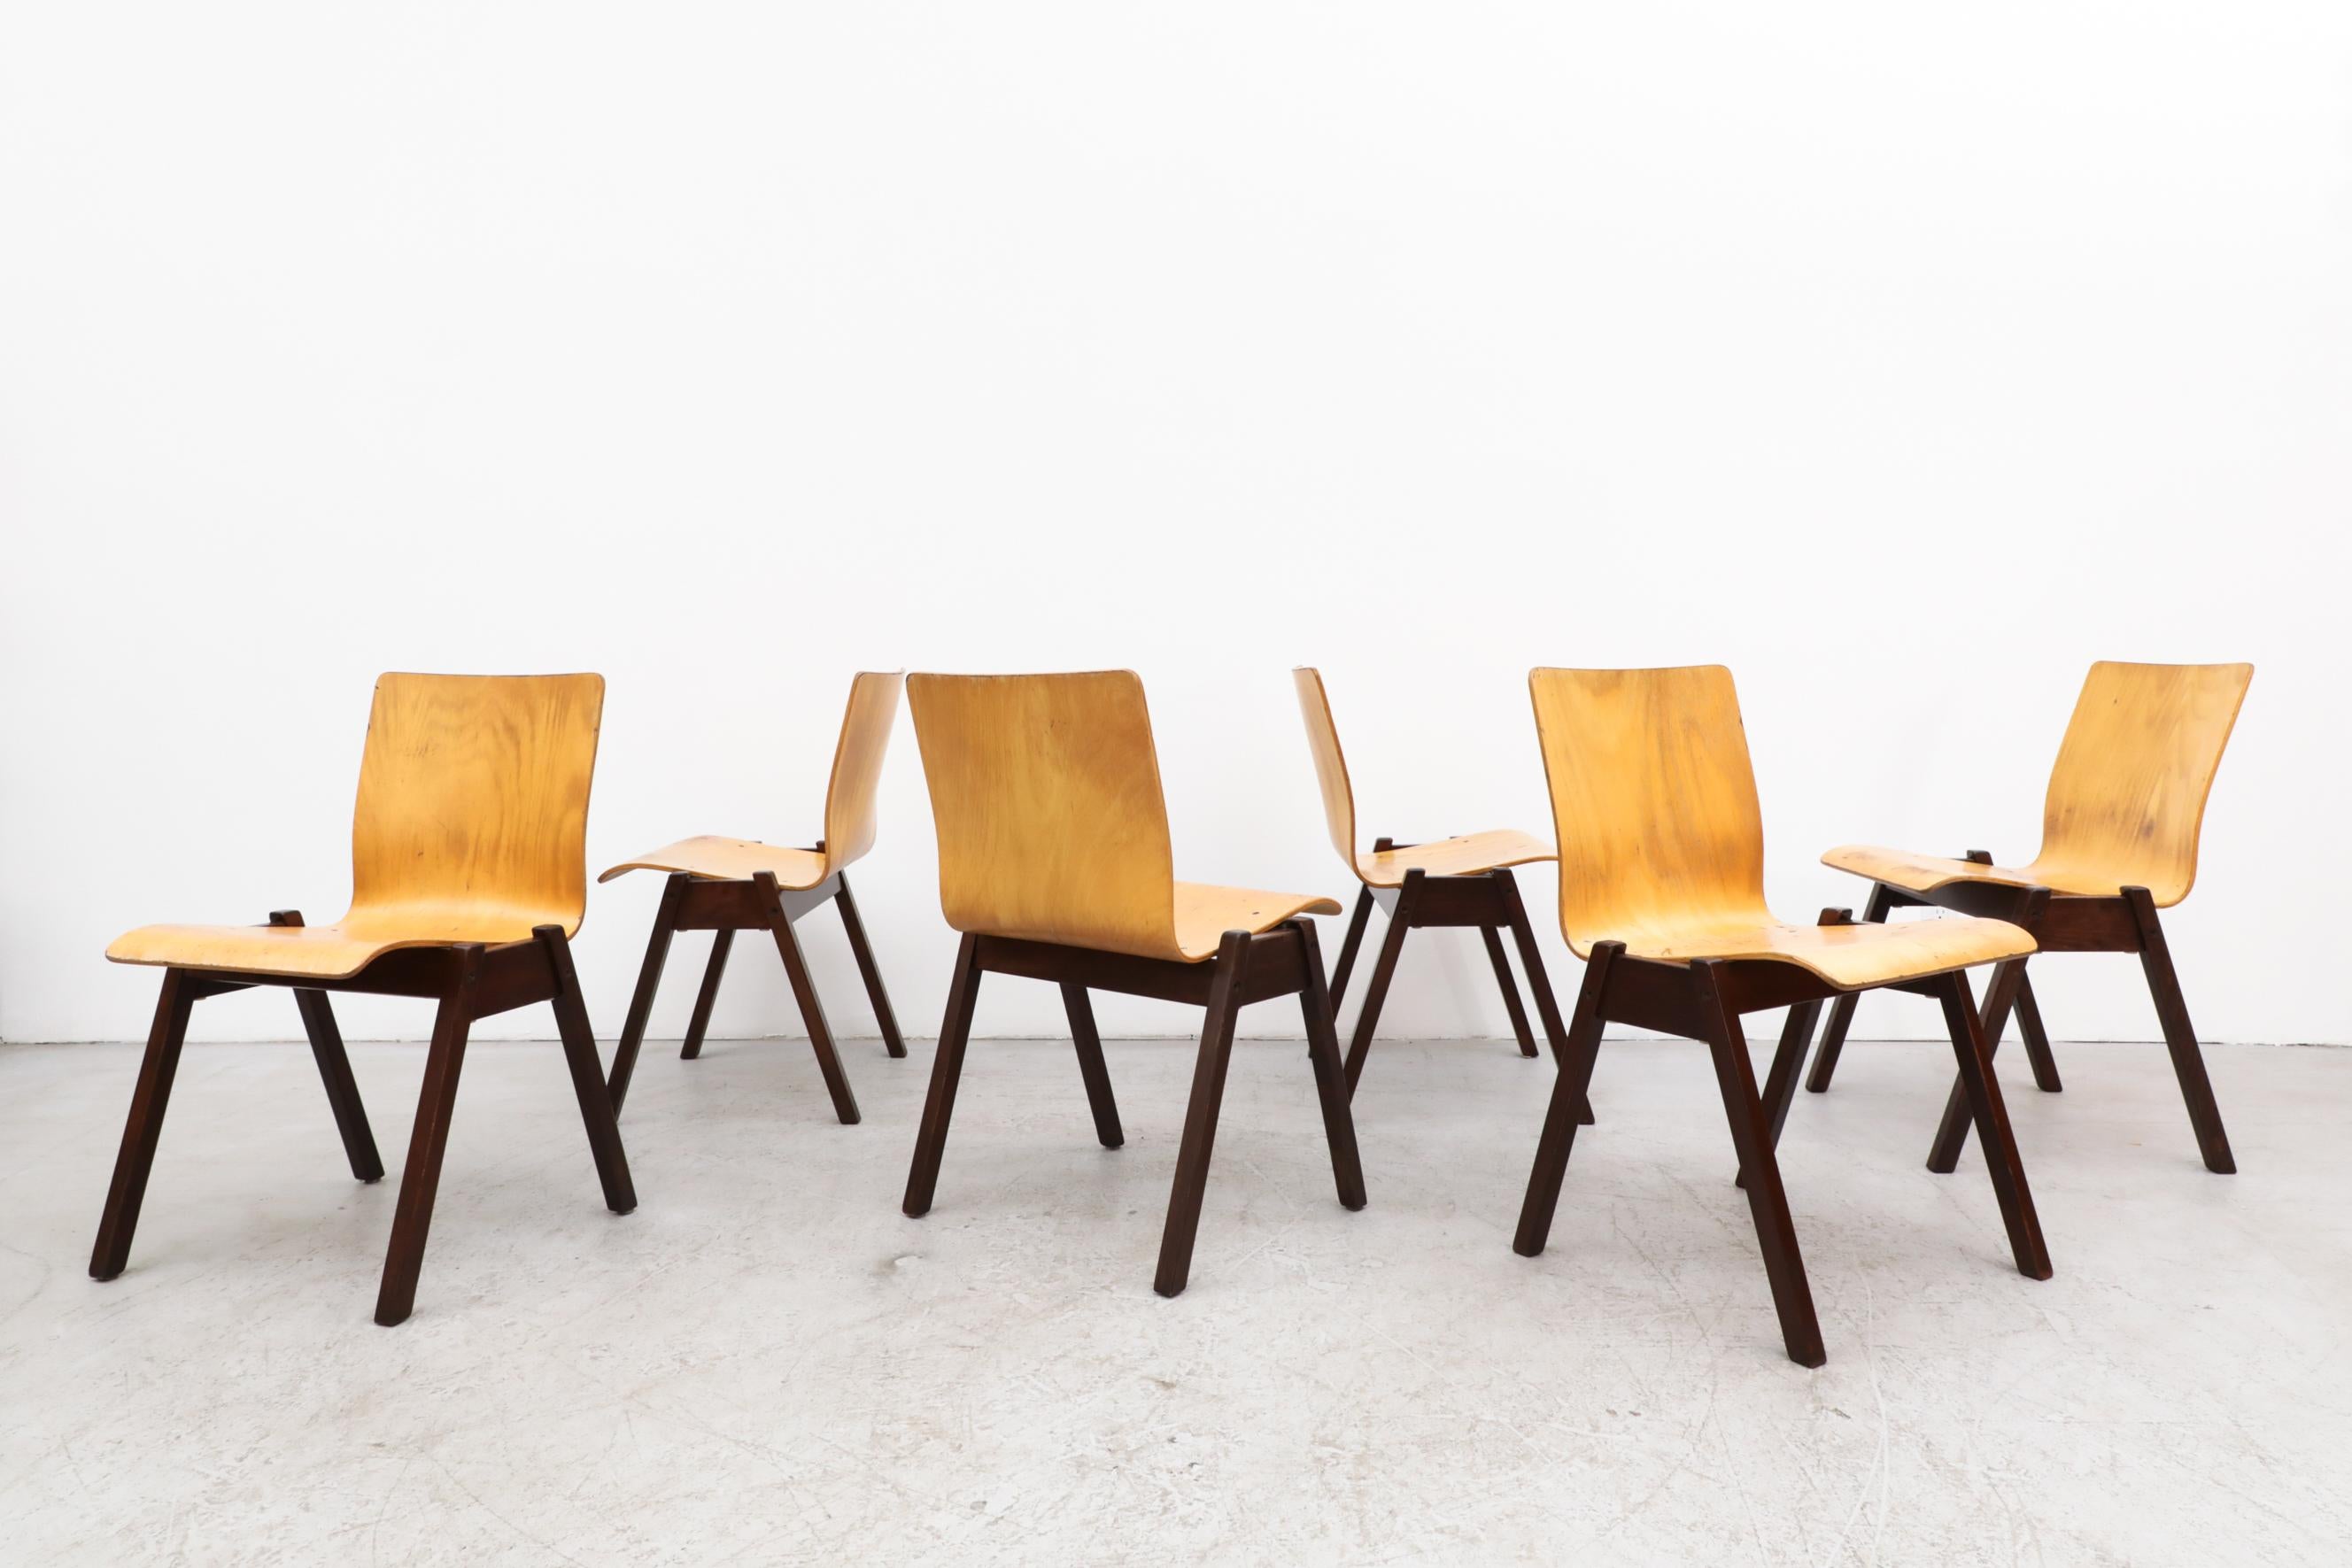 Roland Rainer style stacking chairs with bent beech wood seating and dark brown stained wood frames. In very original condition with visible wear and signs of heavy use. These were once used in a church. Wear is consistent with their age and use.